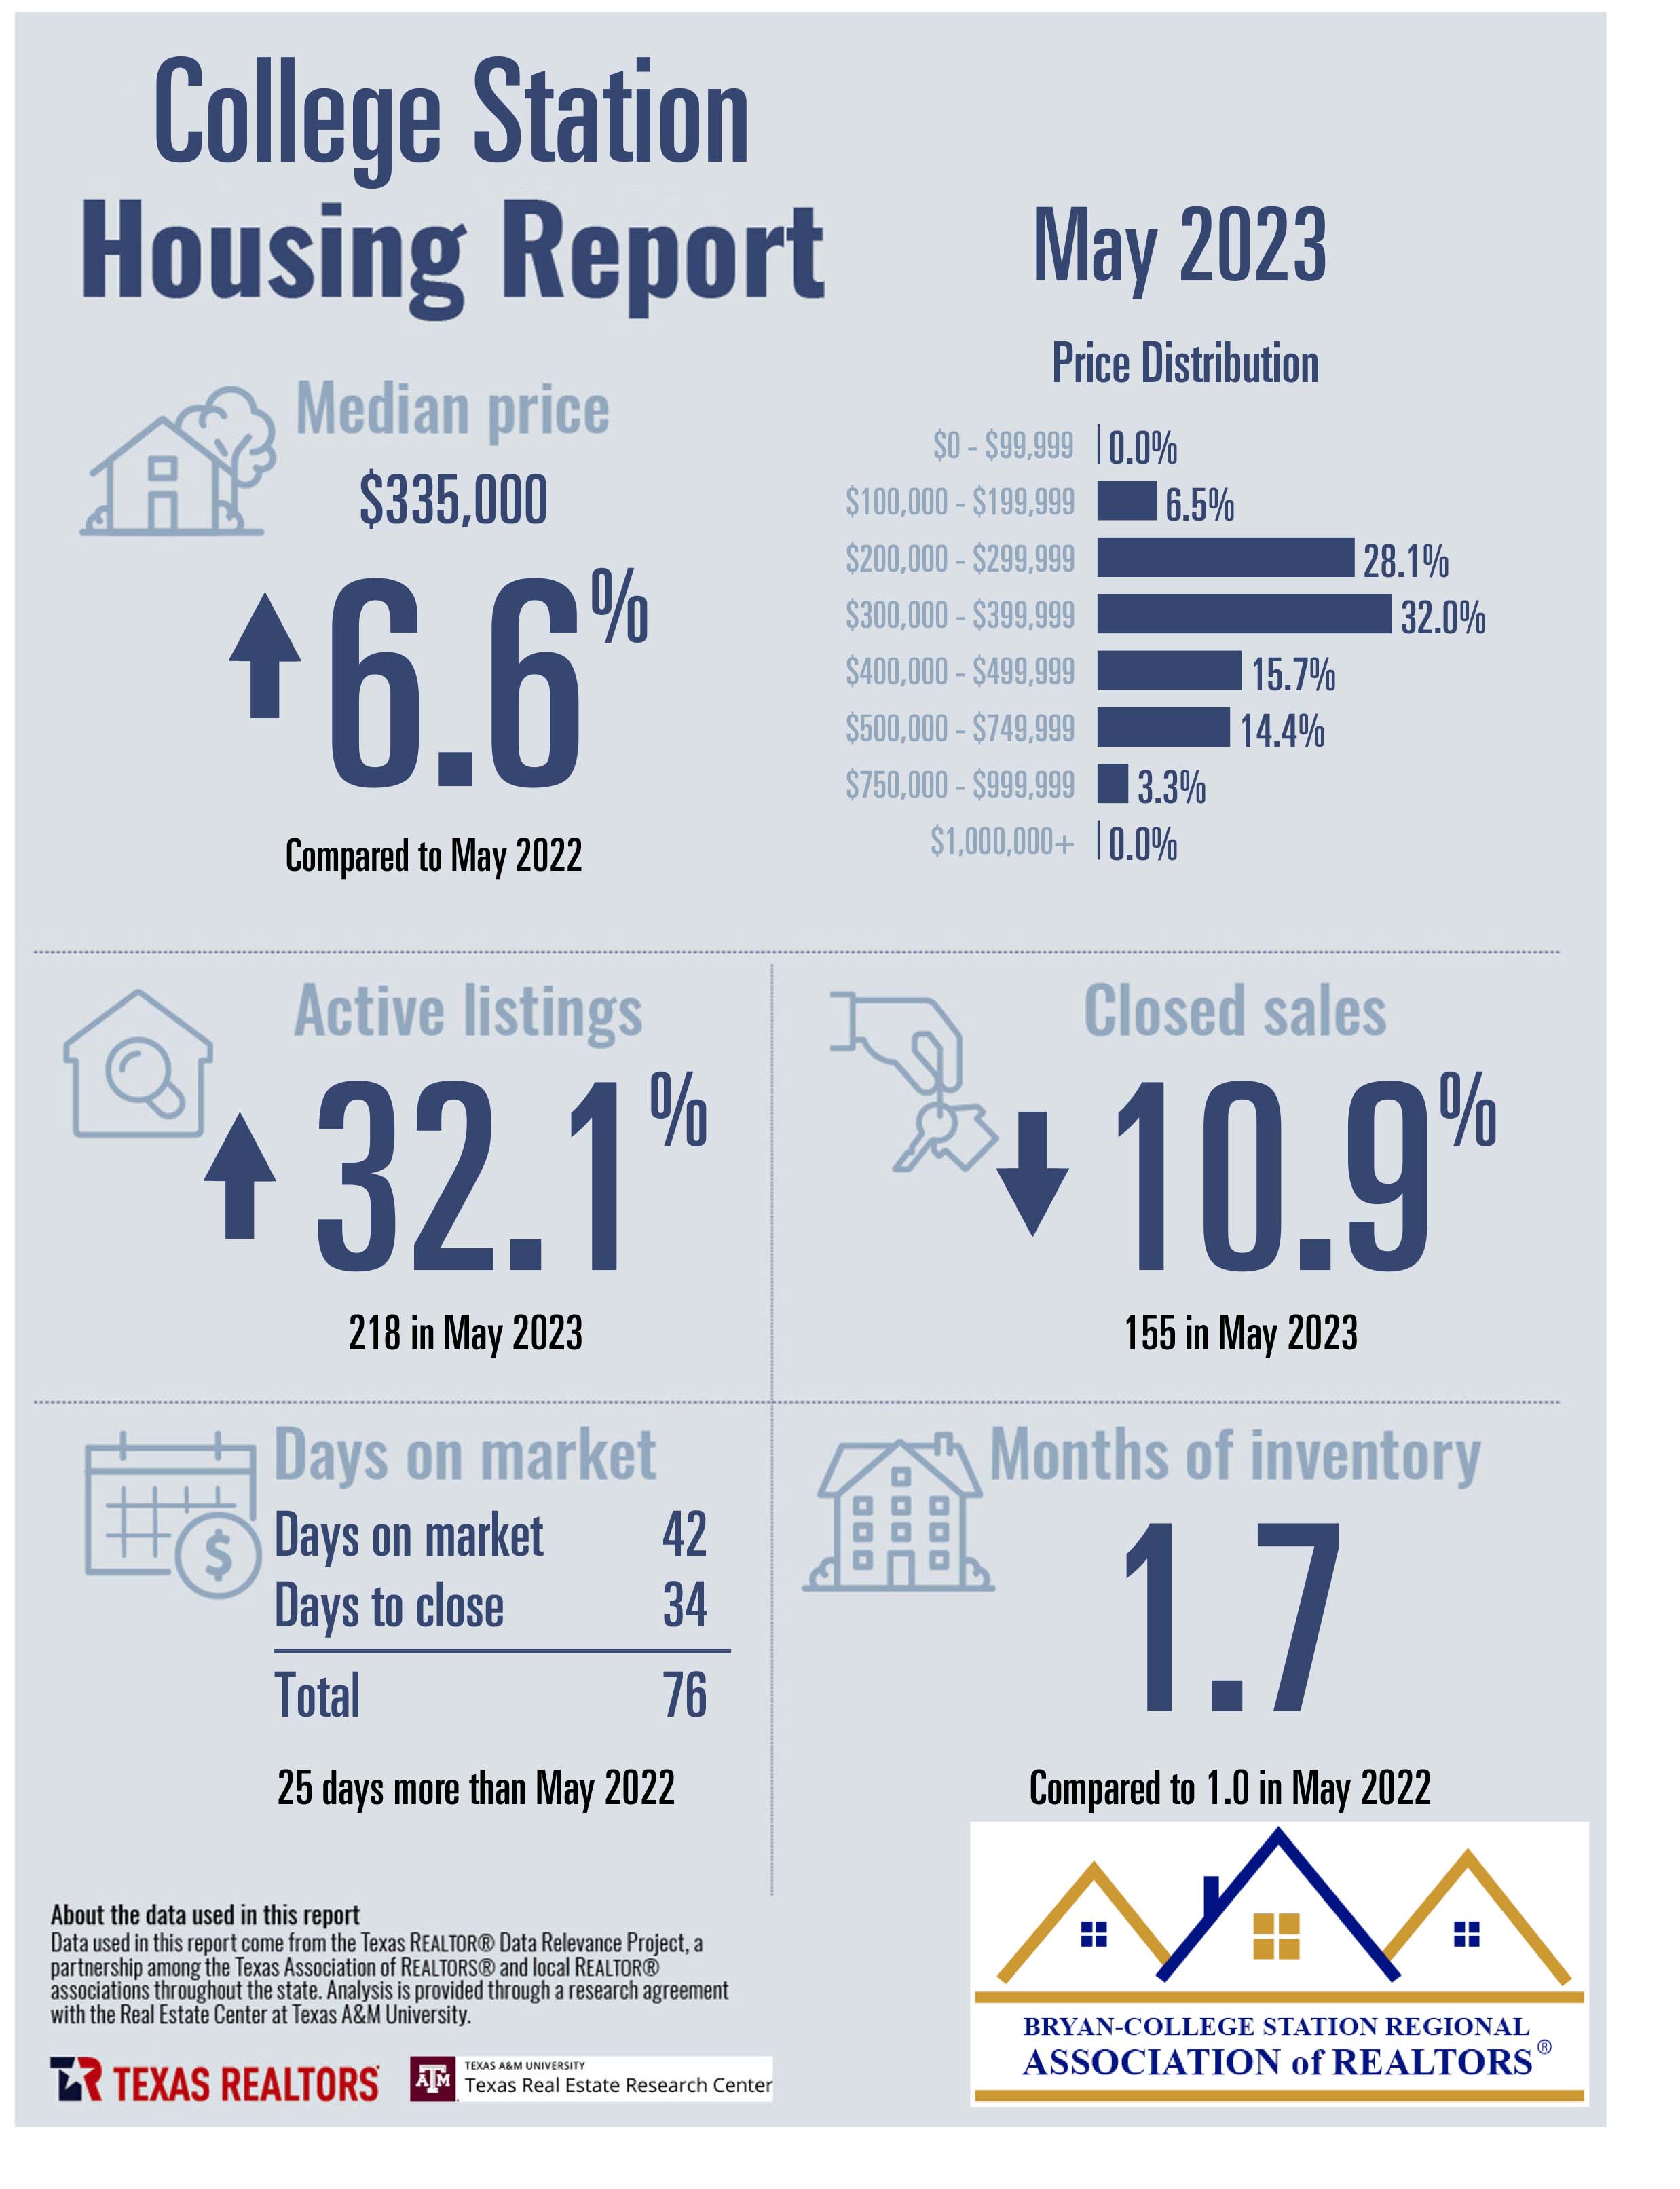 Residential Home Sale Report may 2023 - College Station